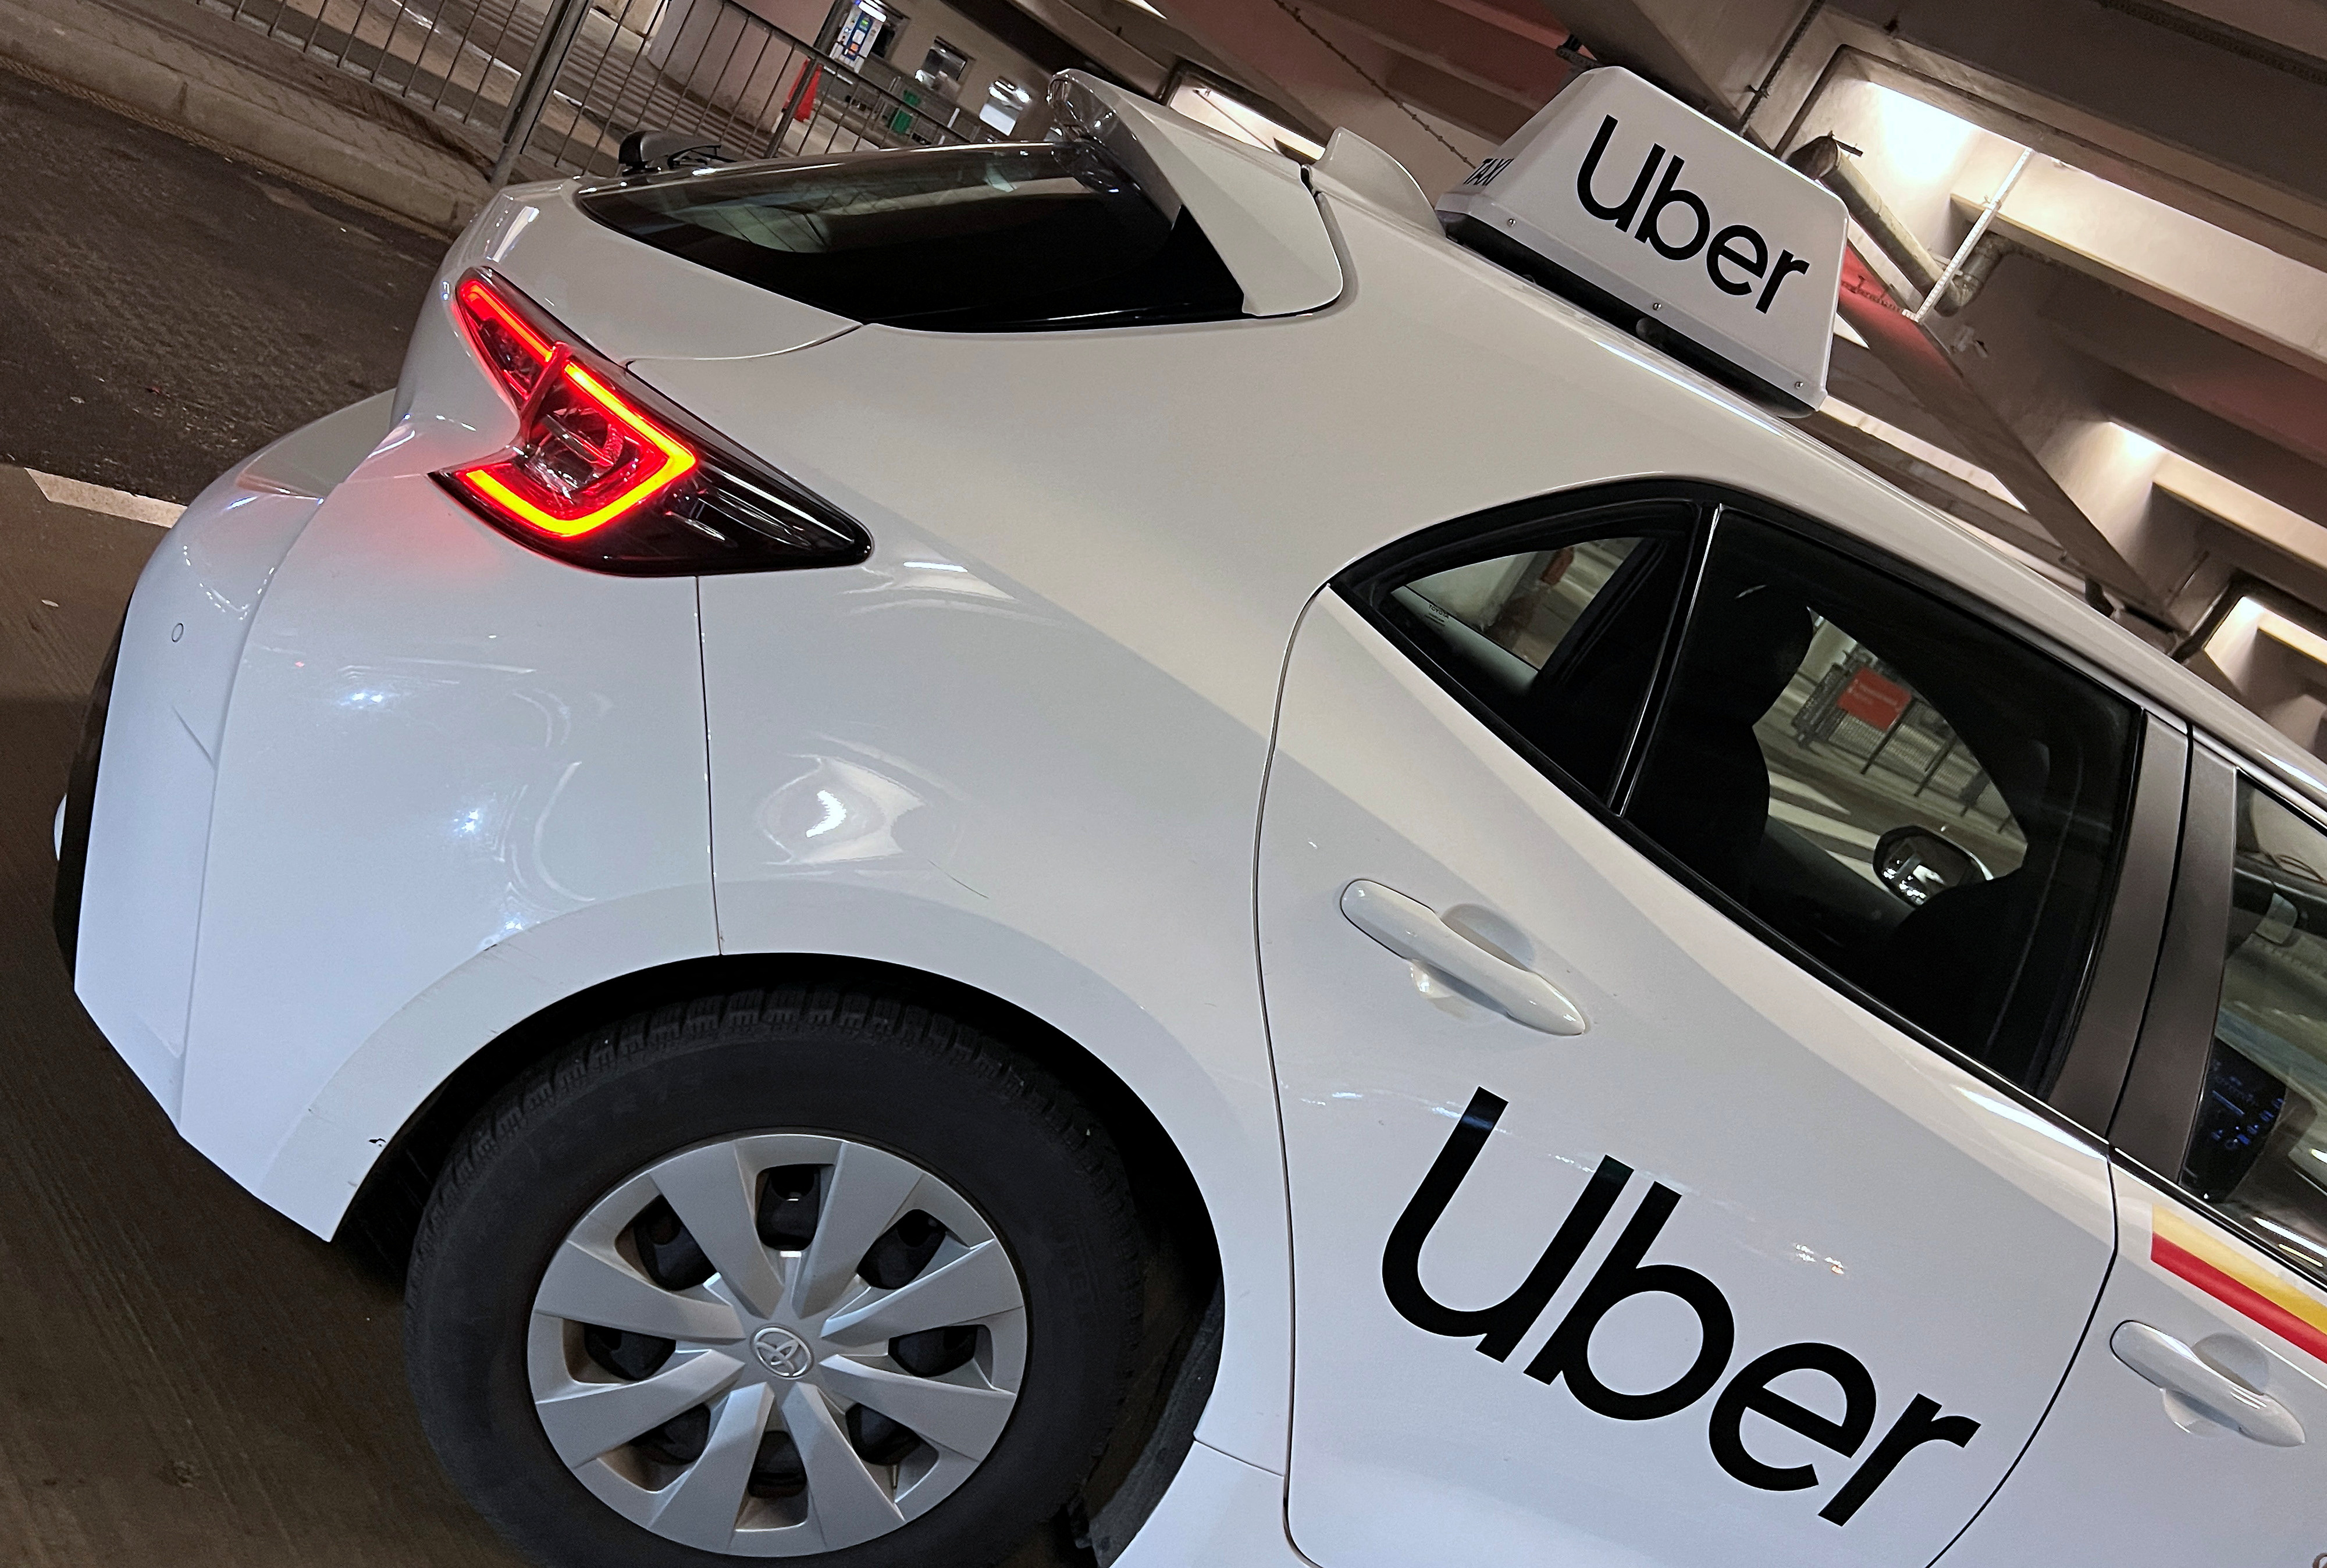 Uber branding is seen on private hire vehicle at Chopin Airport in Warsaw